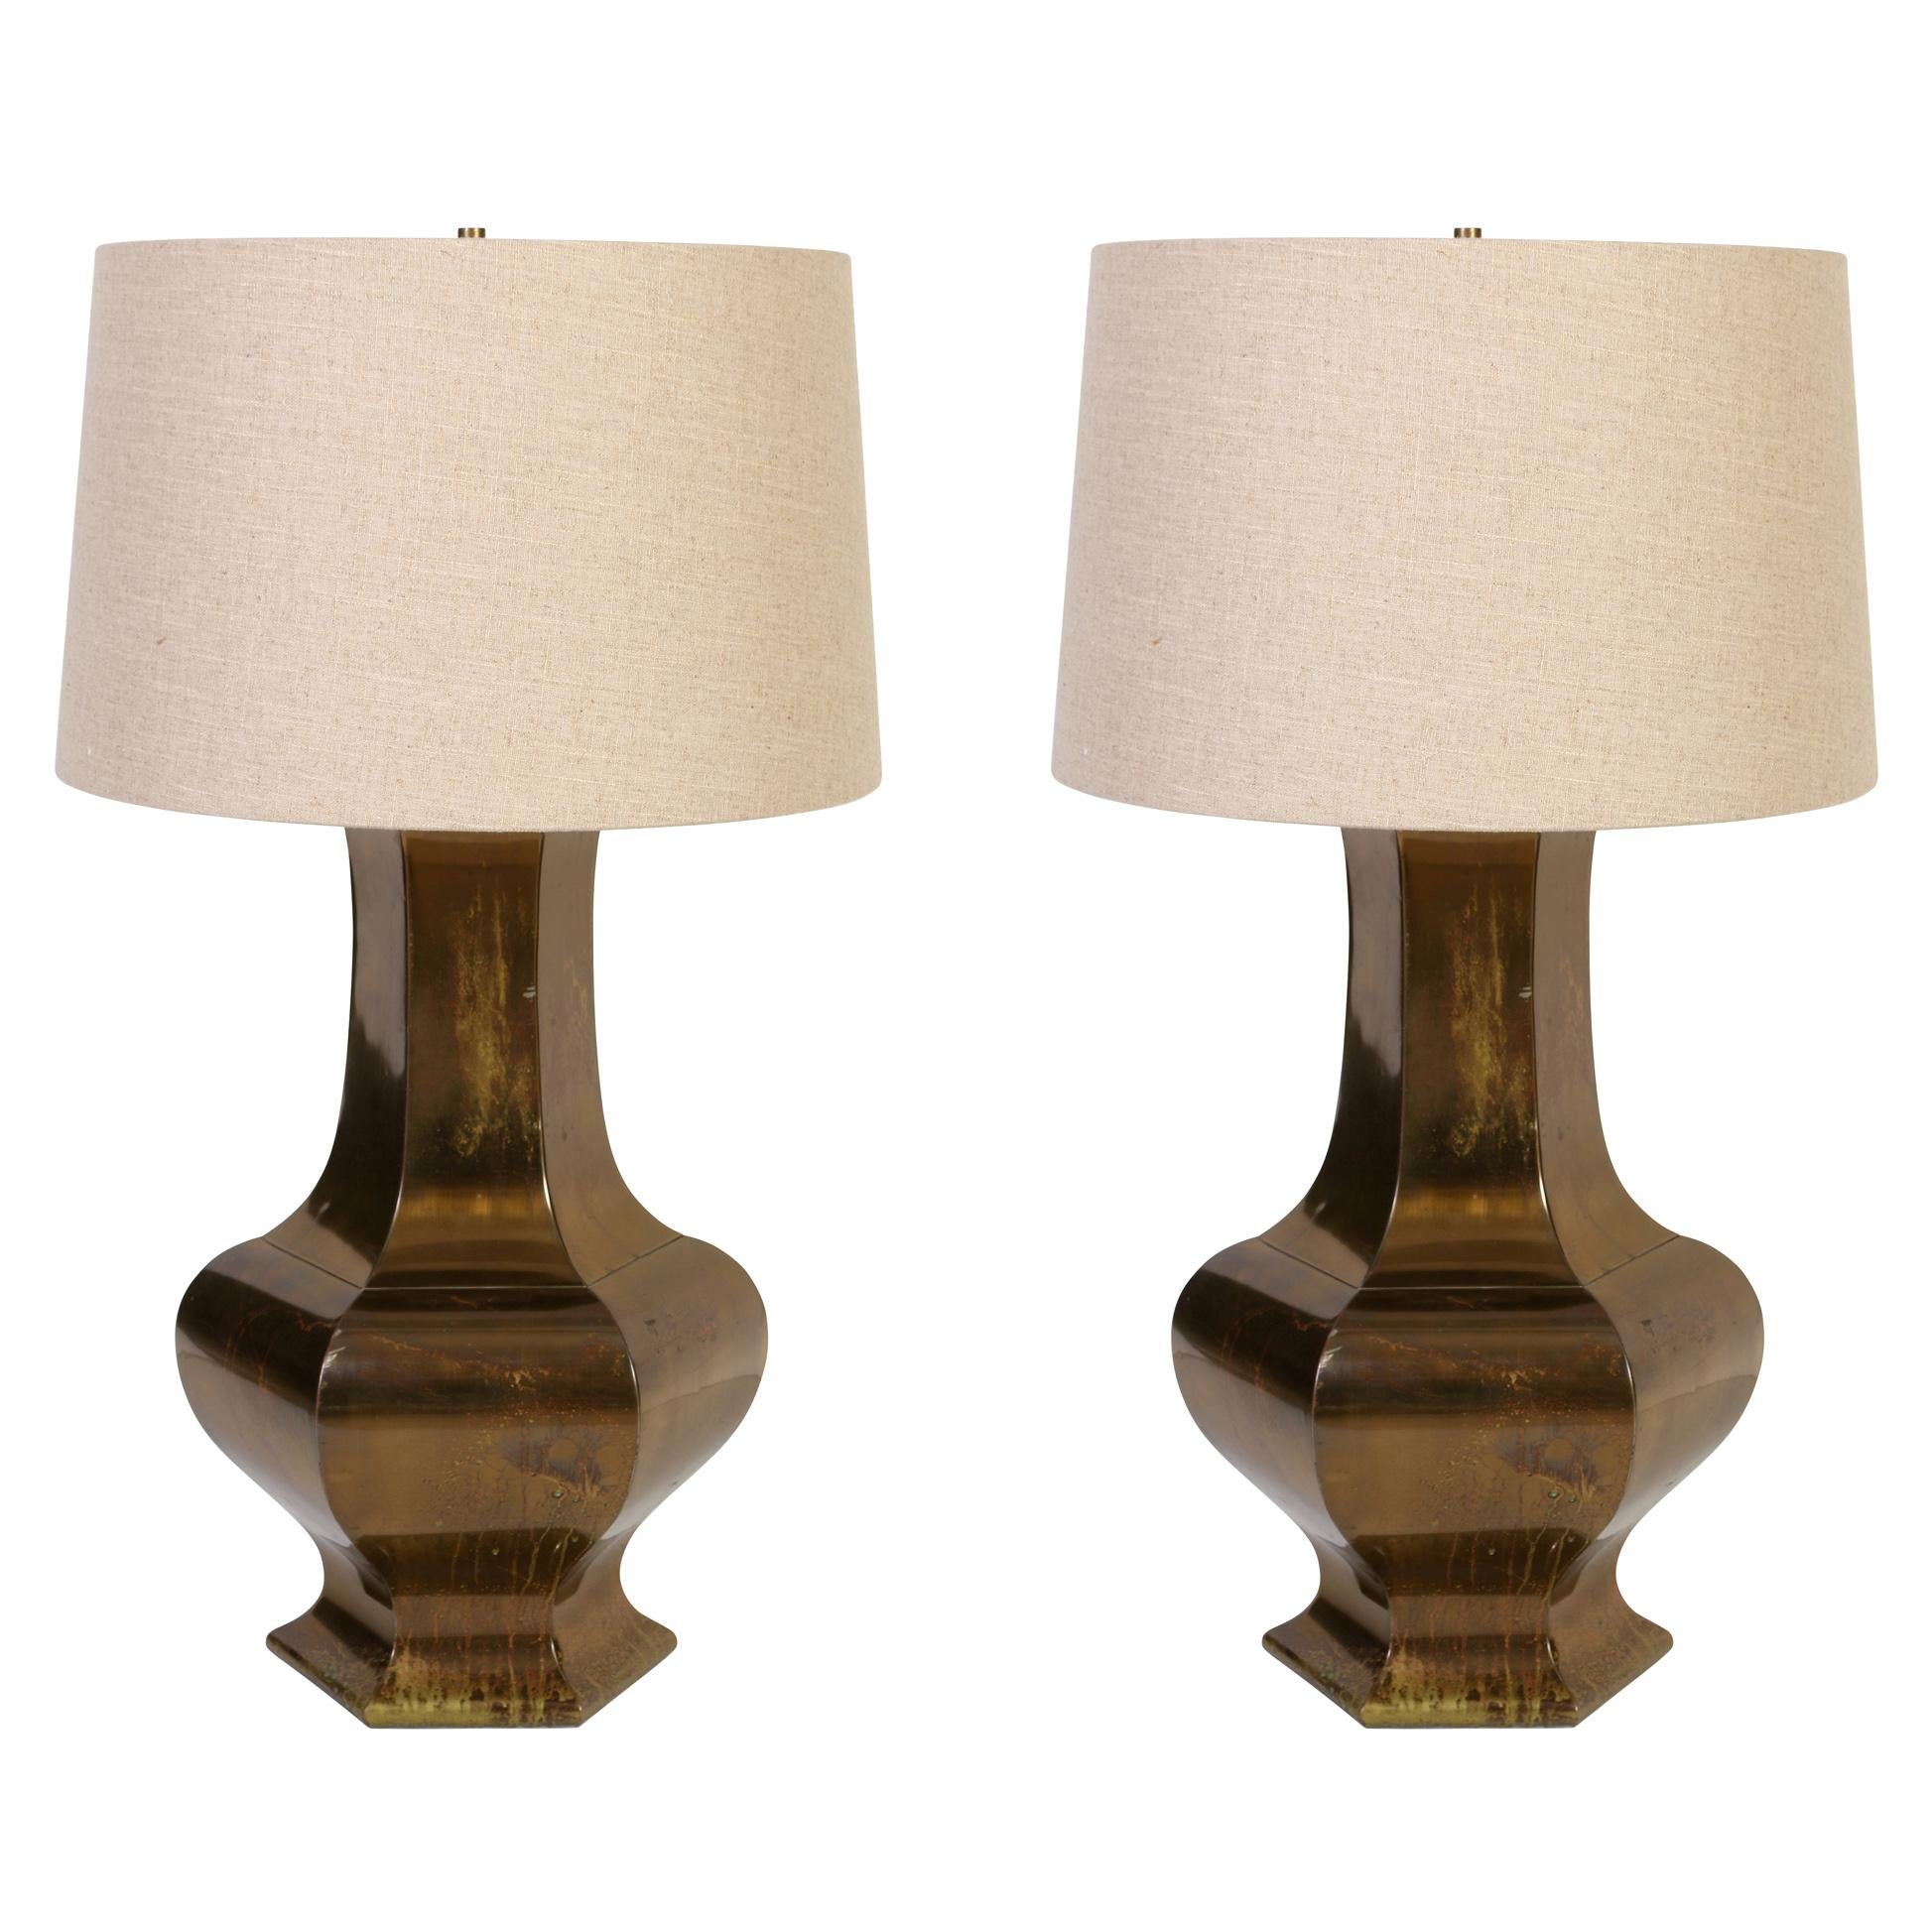 Pair of Vintage Brass Hexagonal Lamps For Sale at 1stDibs